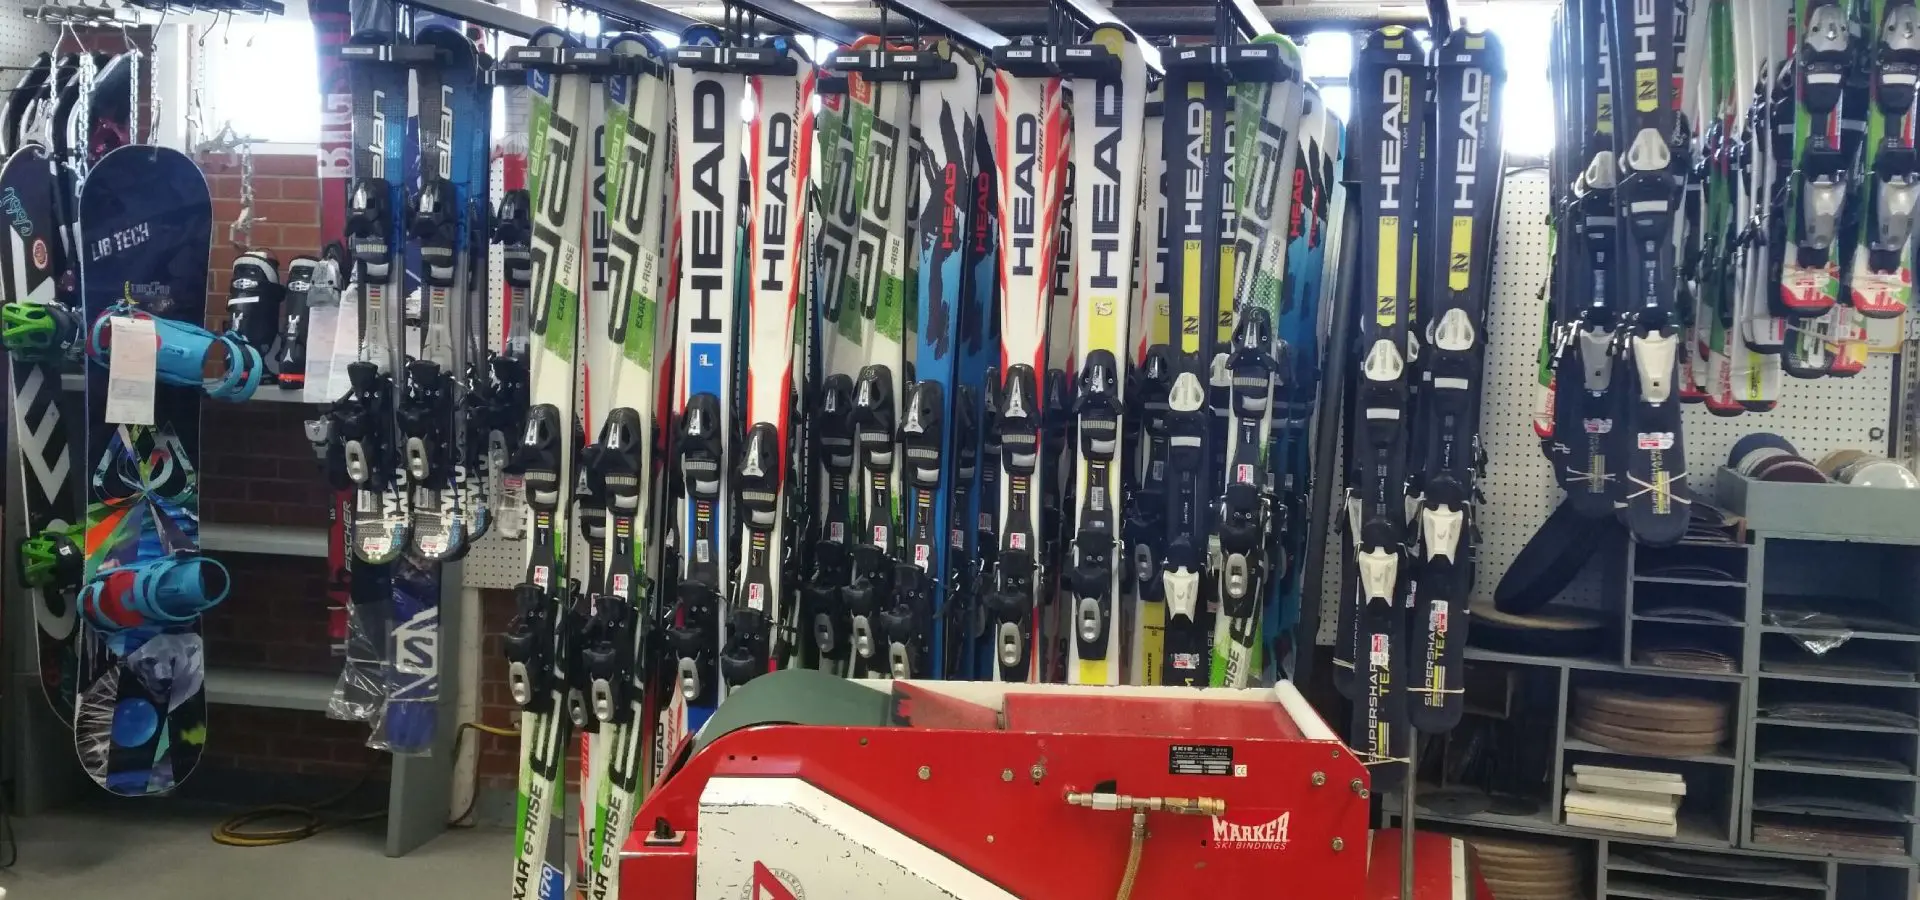 A bunch of skis hanging up in the store